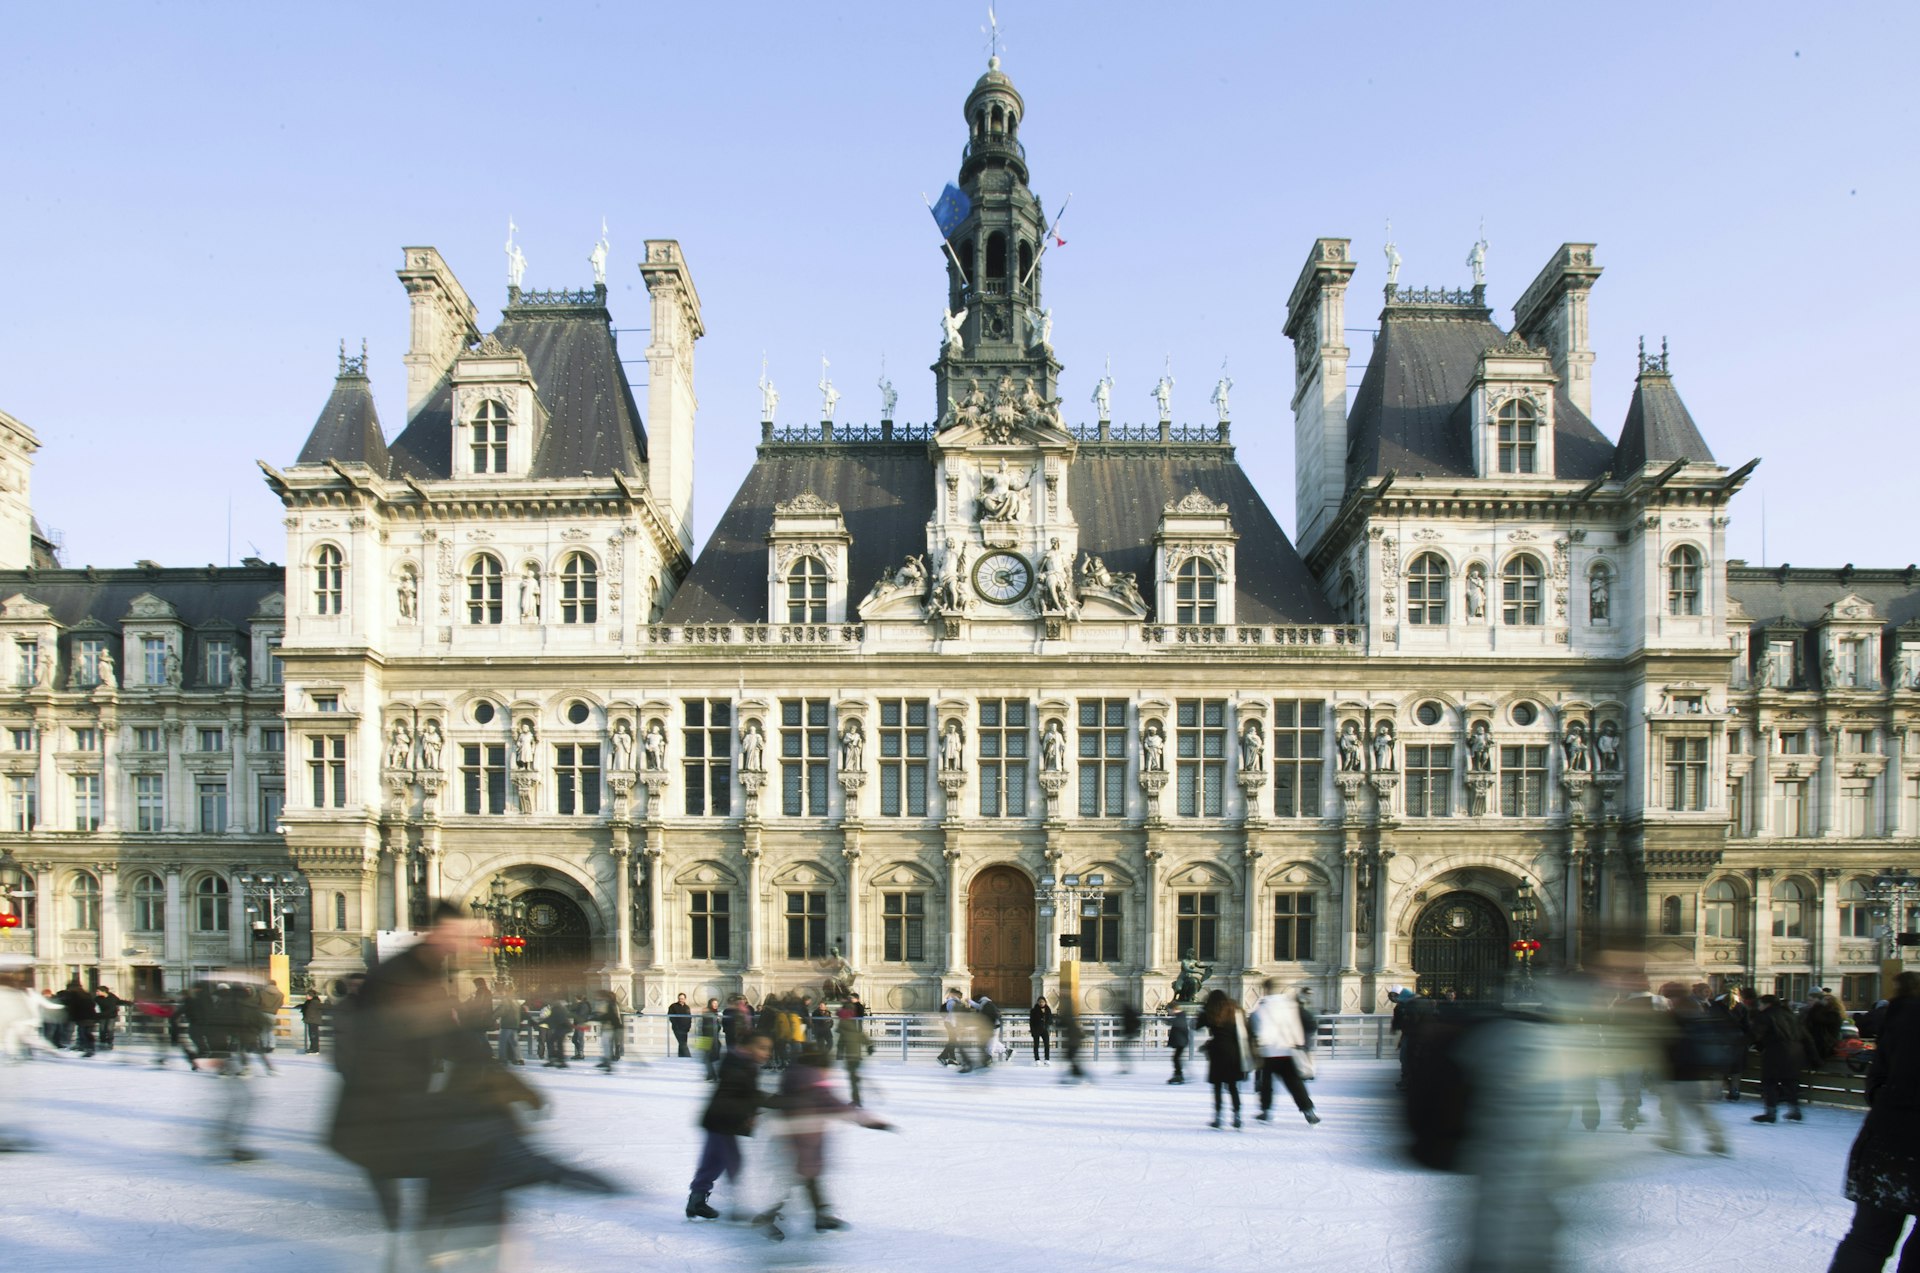 Winter ice-skating at the Hotel de Ville in Paris